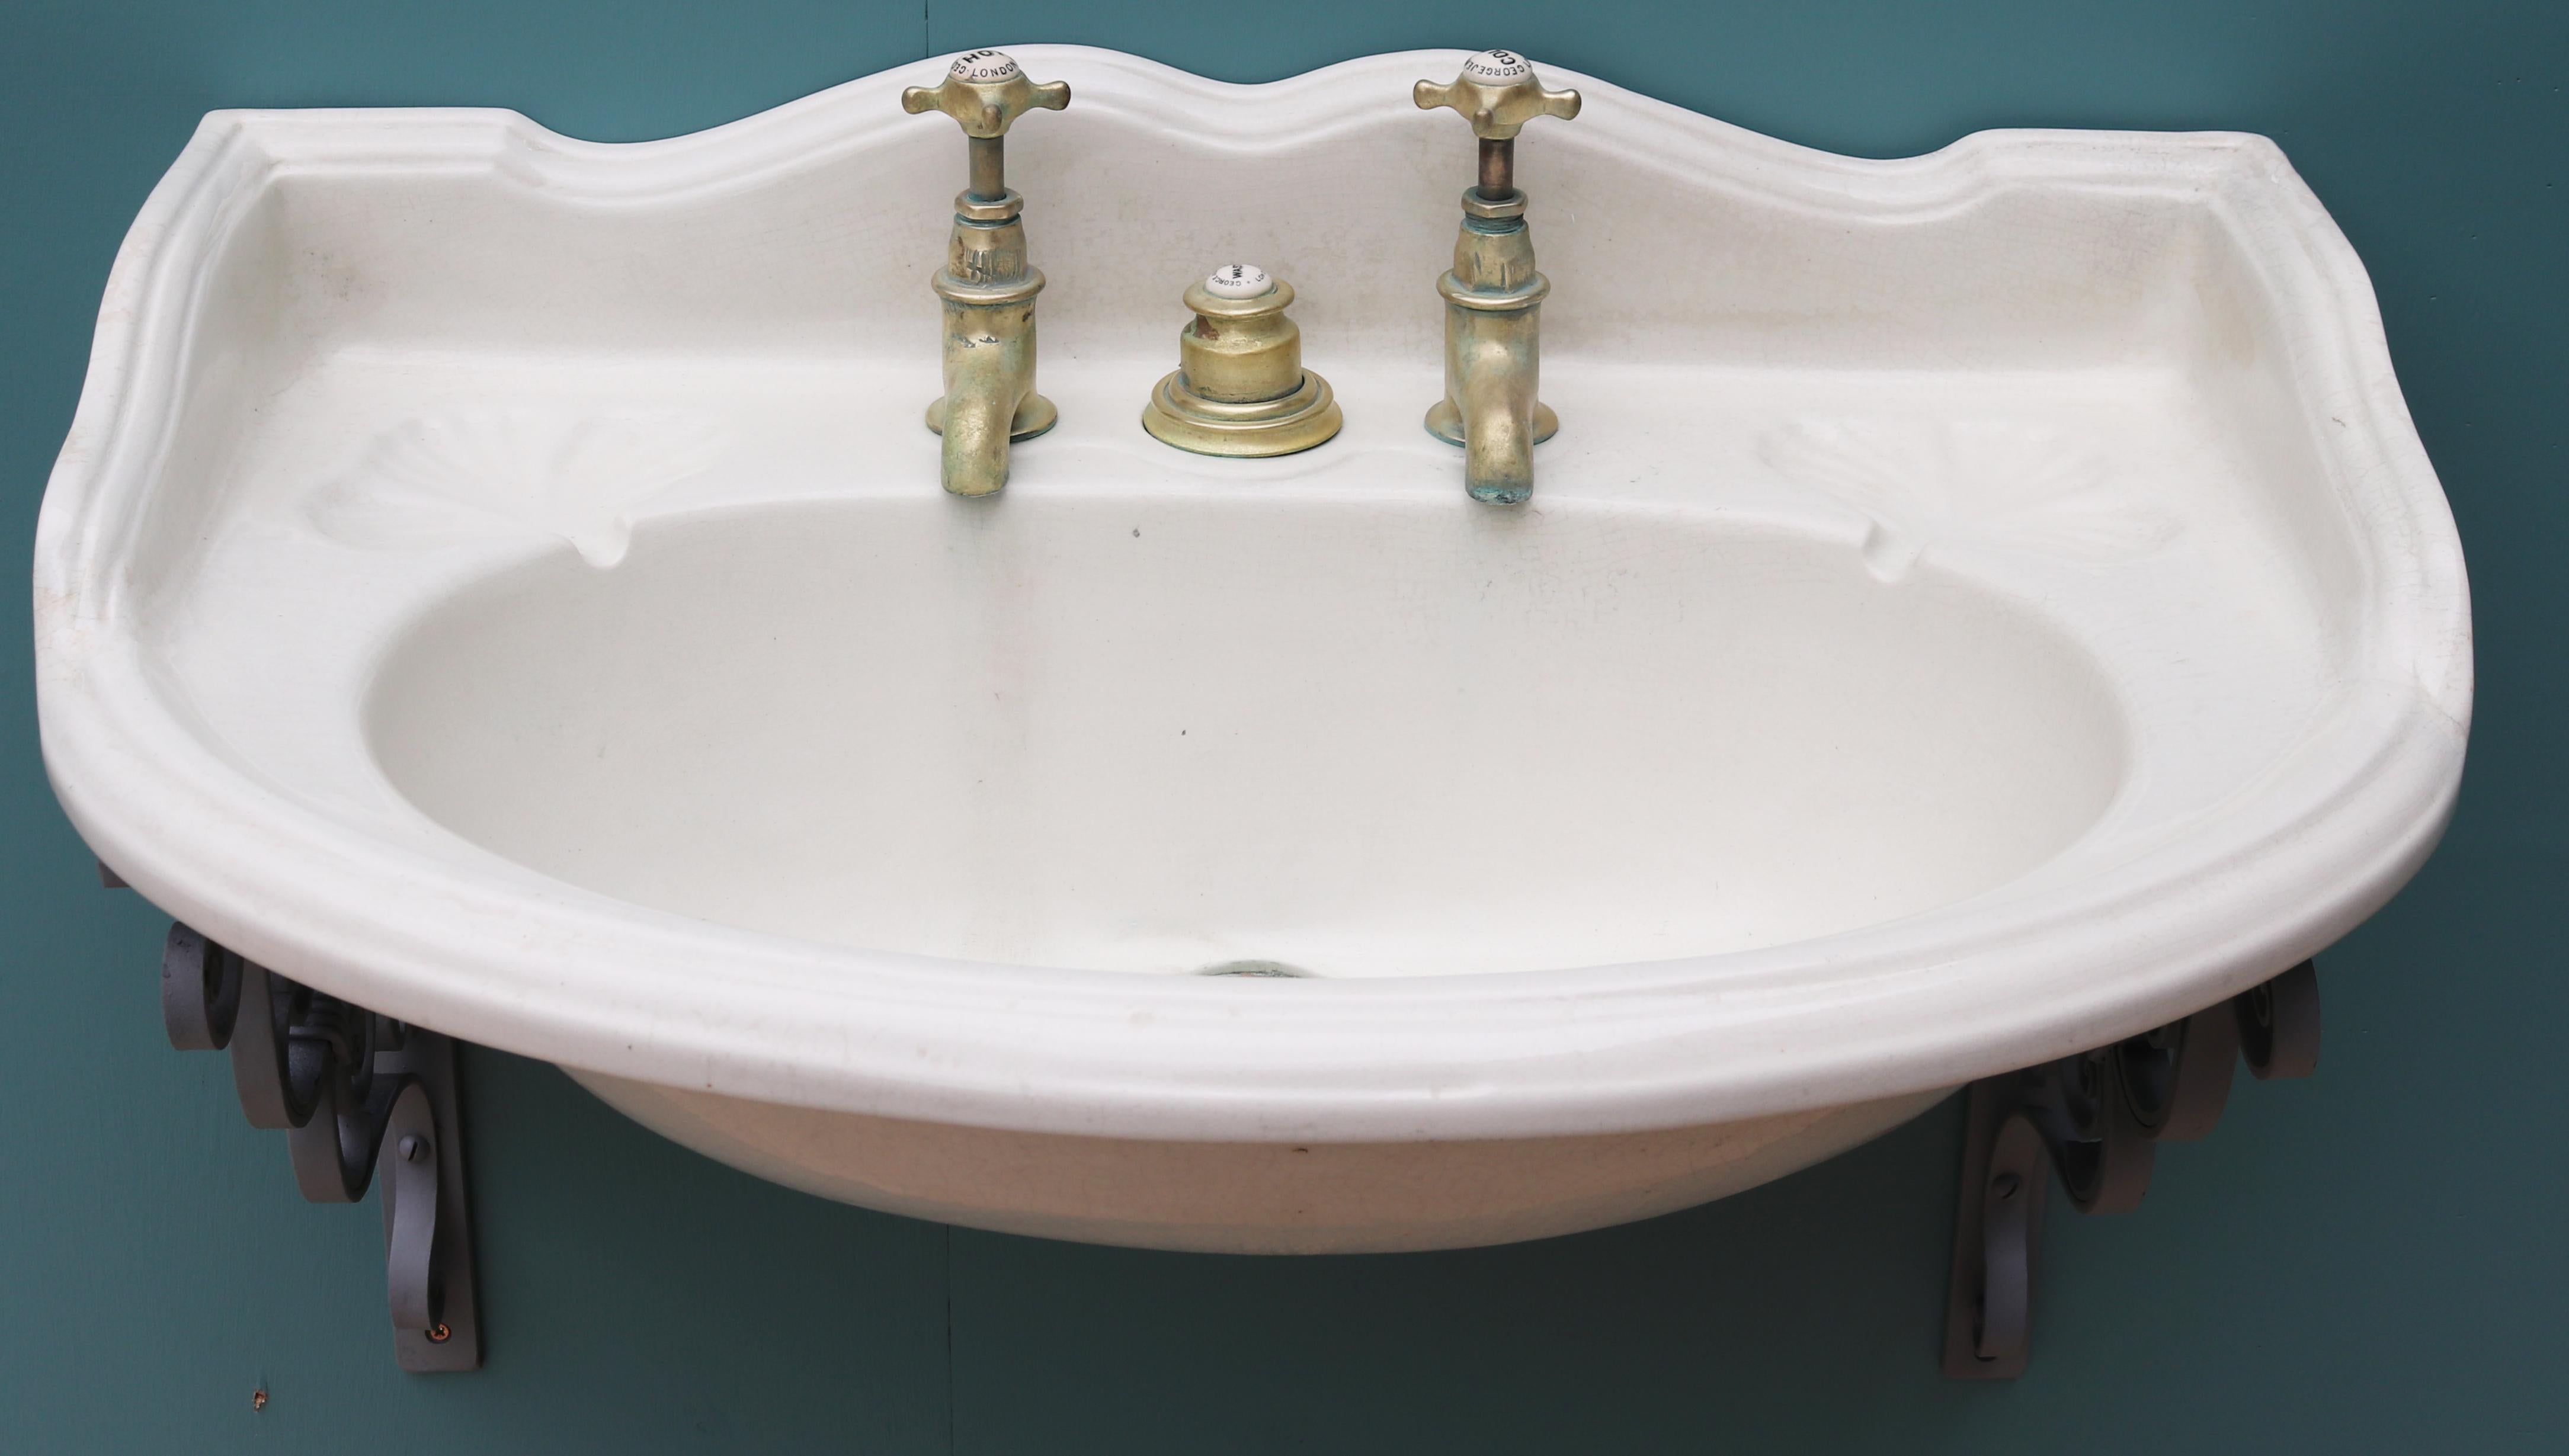 A rare George Jennings wash basin, made from porcelain, with brass taps and plunger waste. Wall mounted with wrought iron brackets. Good structural condition. Original plunger waste system present. Original taps present. These move freely, but are